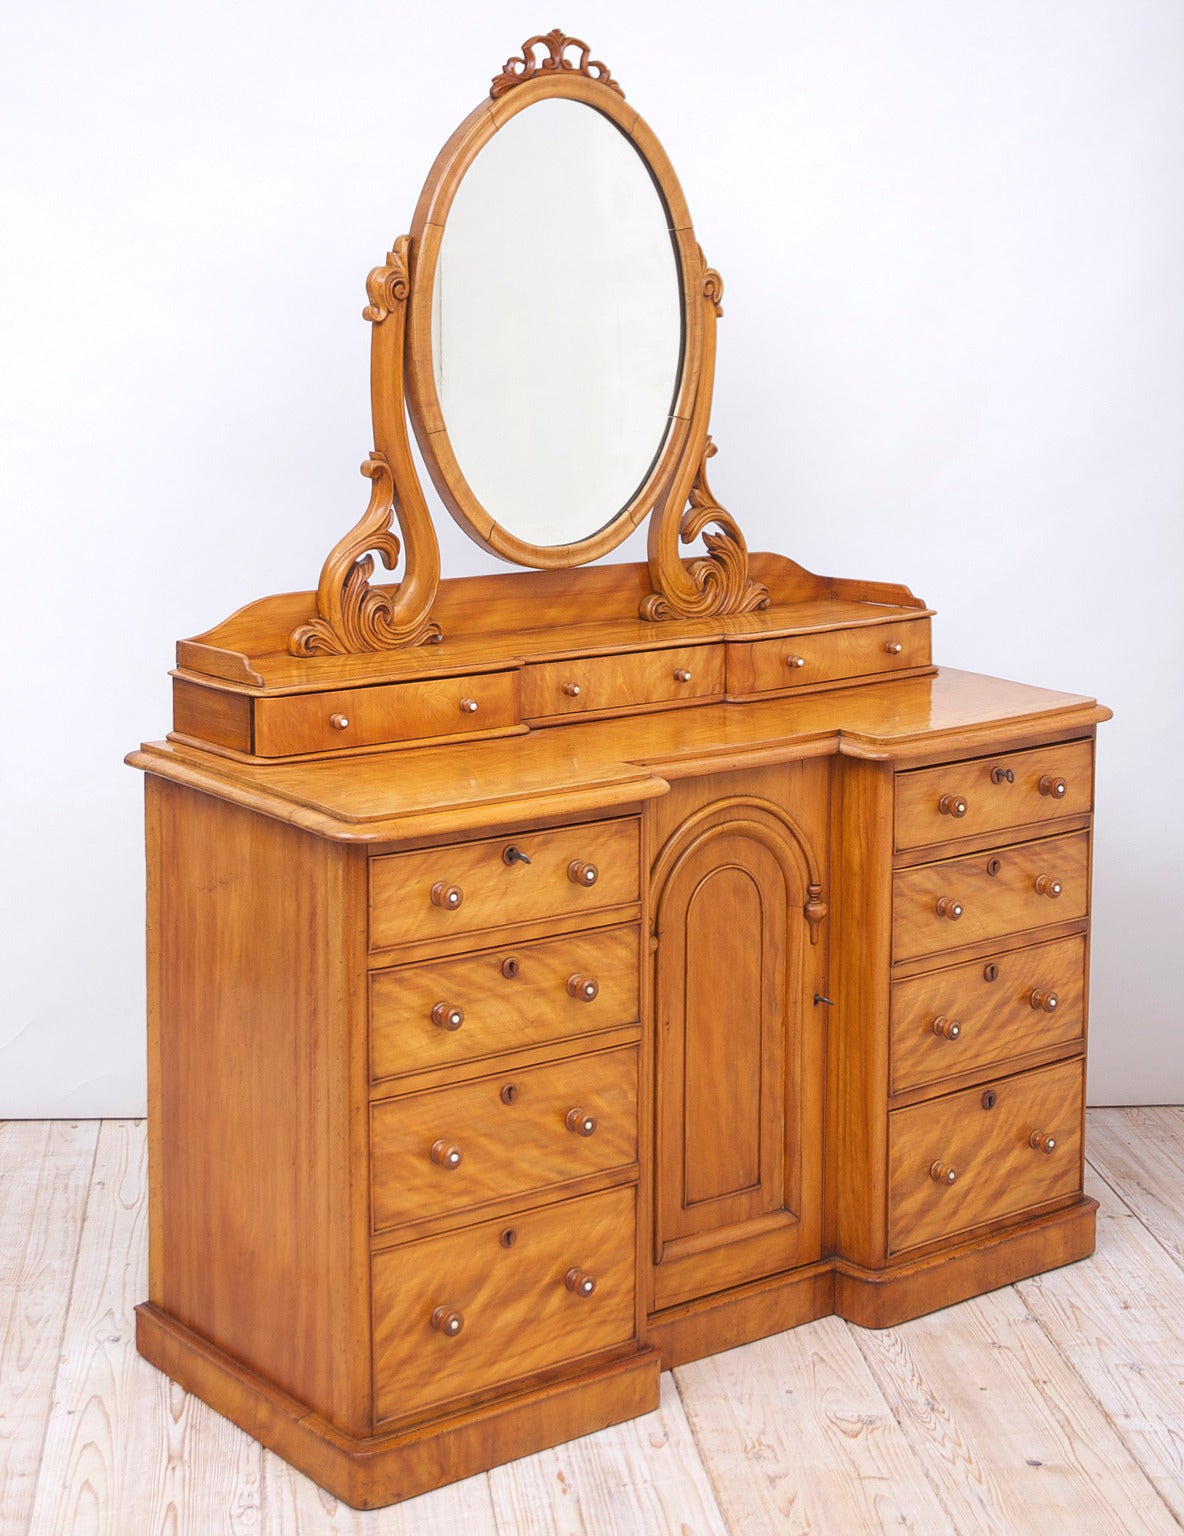 A beautifully crafted late Regency dressing table or chest with oval mirror in satinwood, featuring a plethora of drawers (eleven in all!) with a central cabinet. England, circa 1830. With a Fine attention to detail, this cabinet appears to have